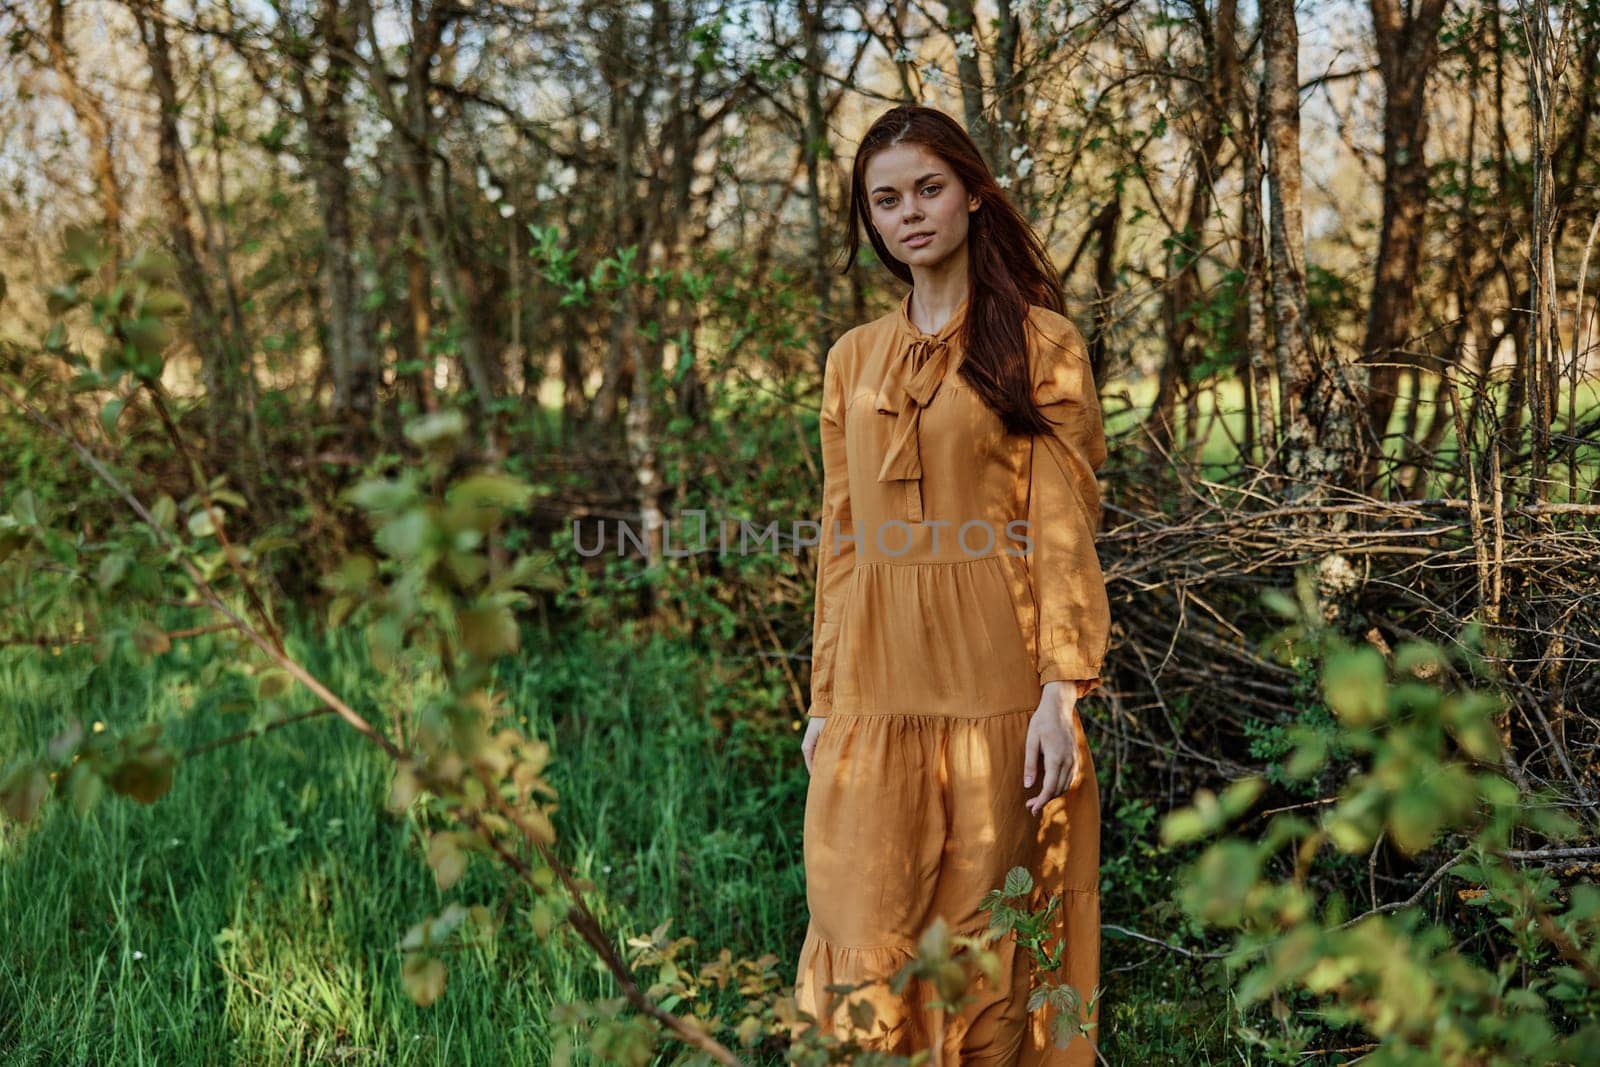 a woman with long hair walks in the shade near the trees, dressed in a long orange dress, enjoying the weather and the weekend, while looking at the camera. The theme of privacy with nature. High quality photo